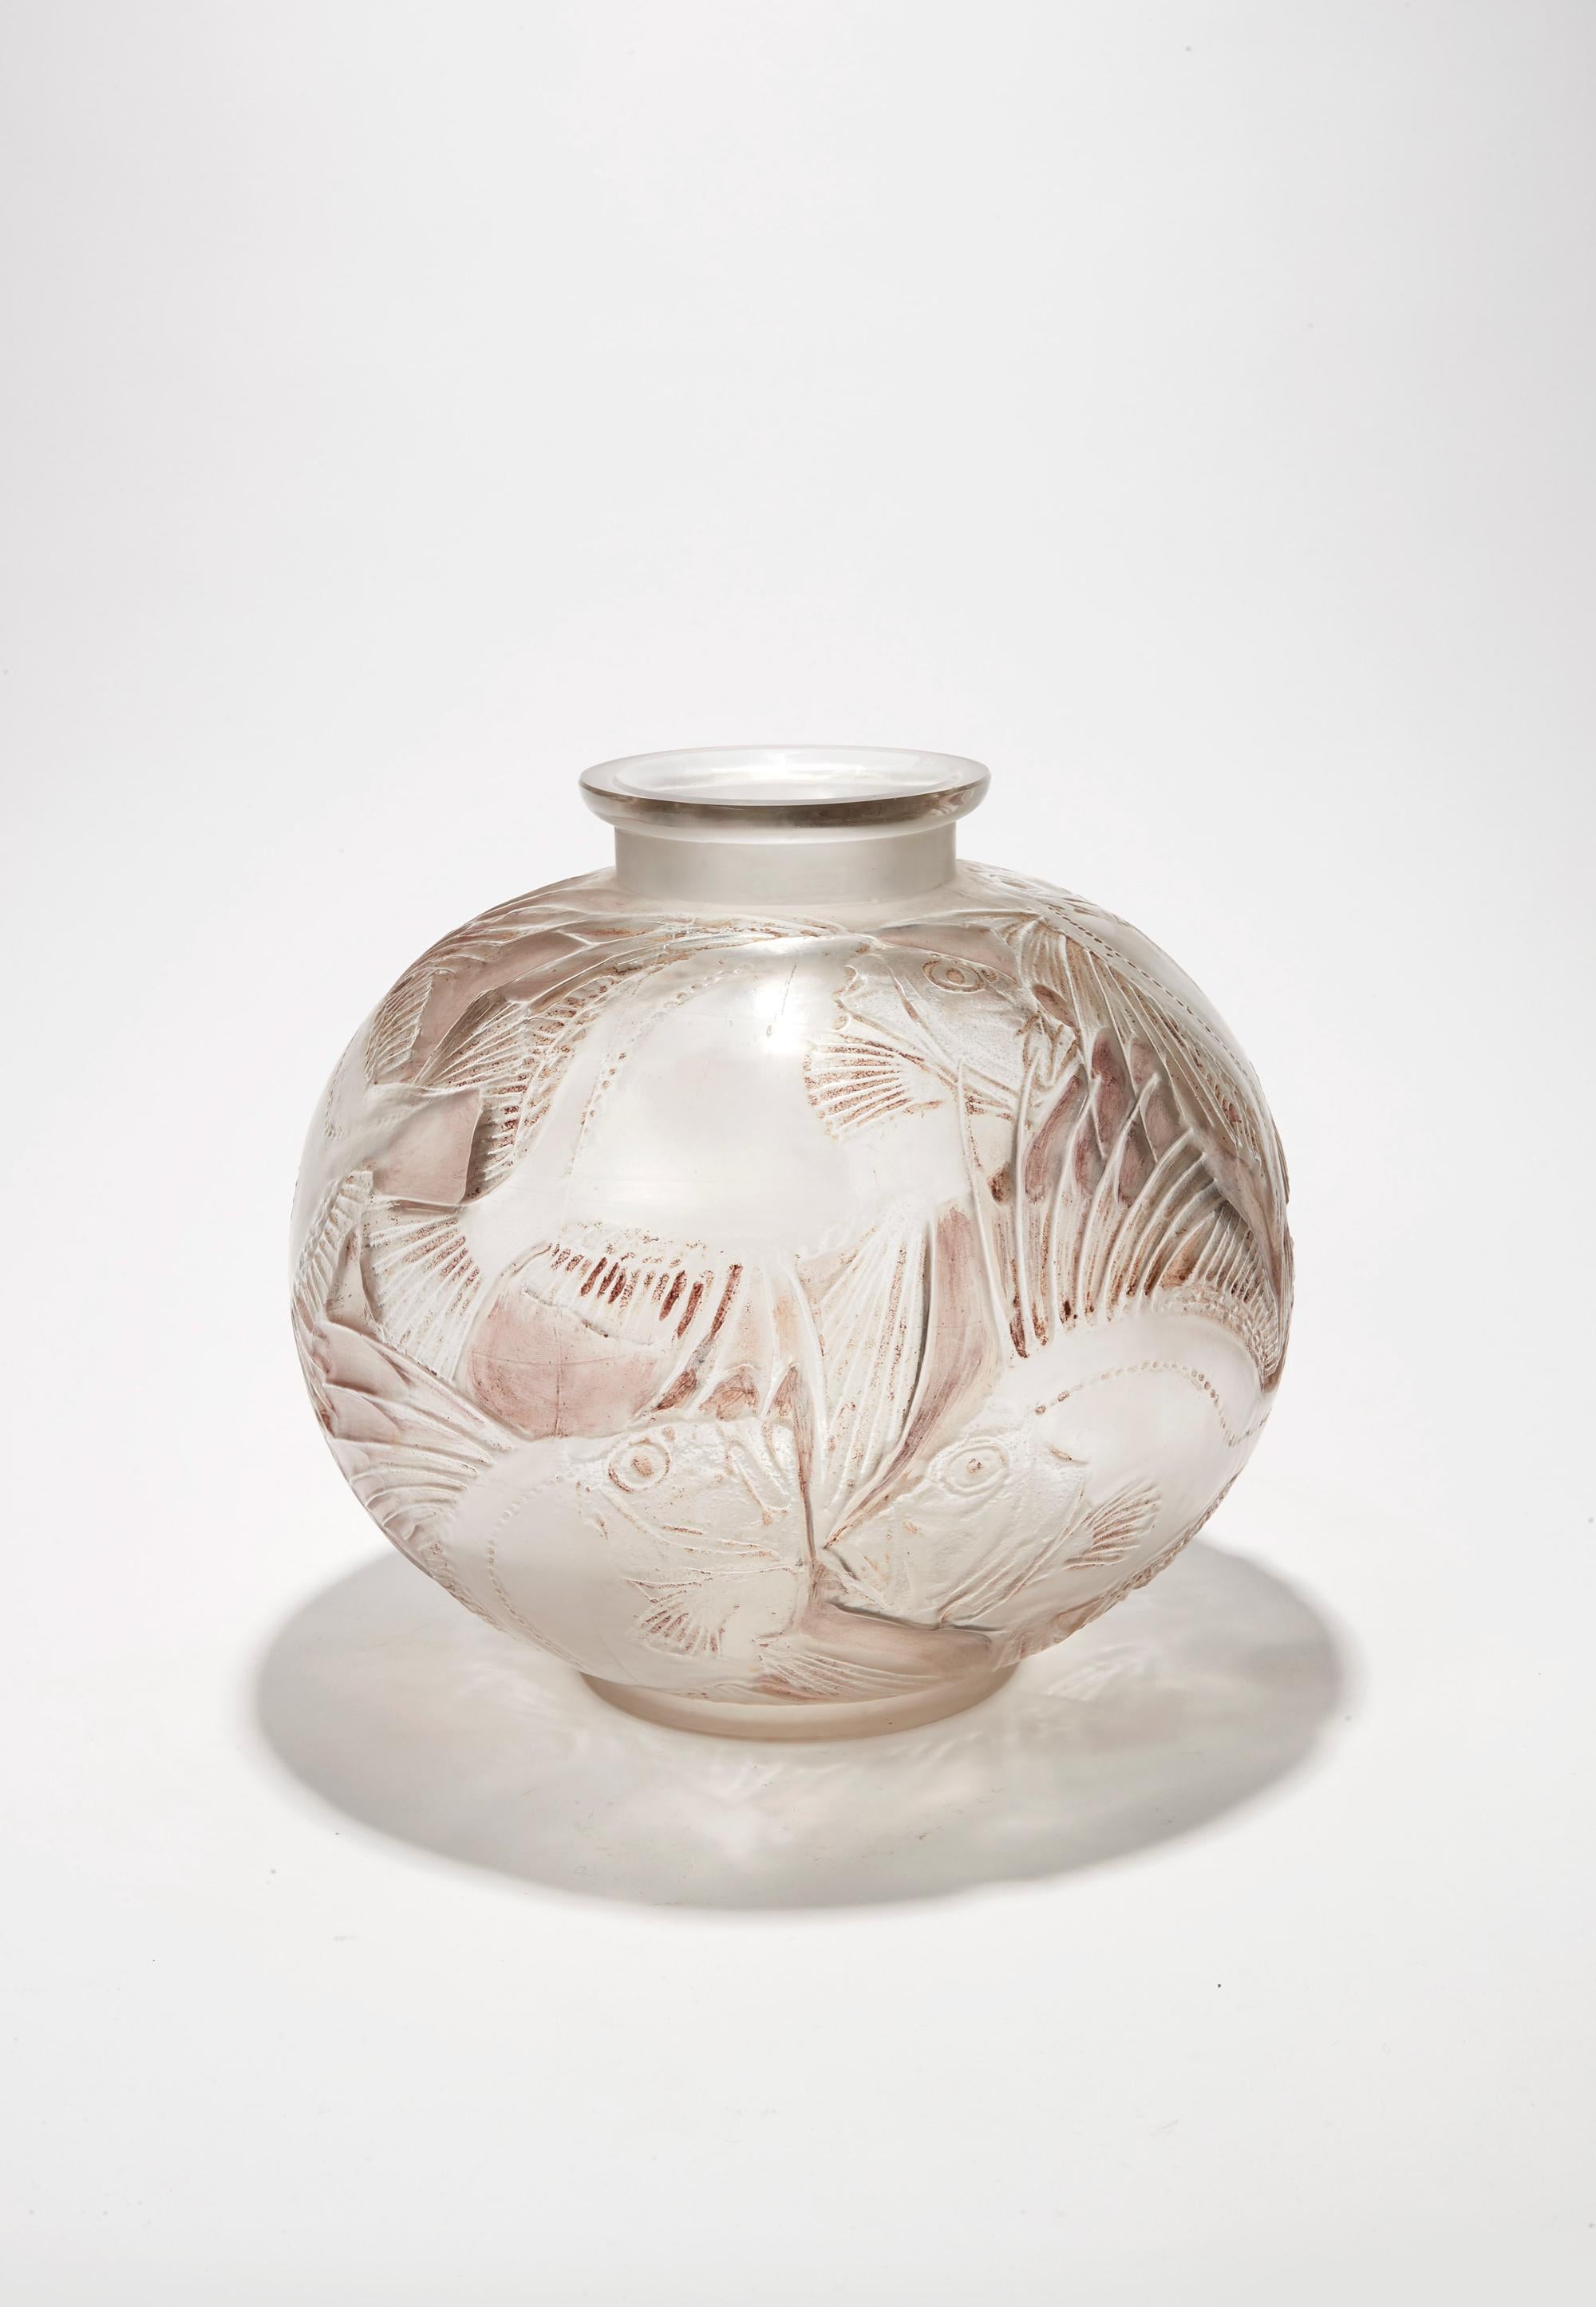 In white blown and moulded opalescent glass, the decor made
up with geometrical fishes. Signed.